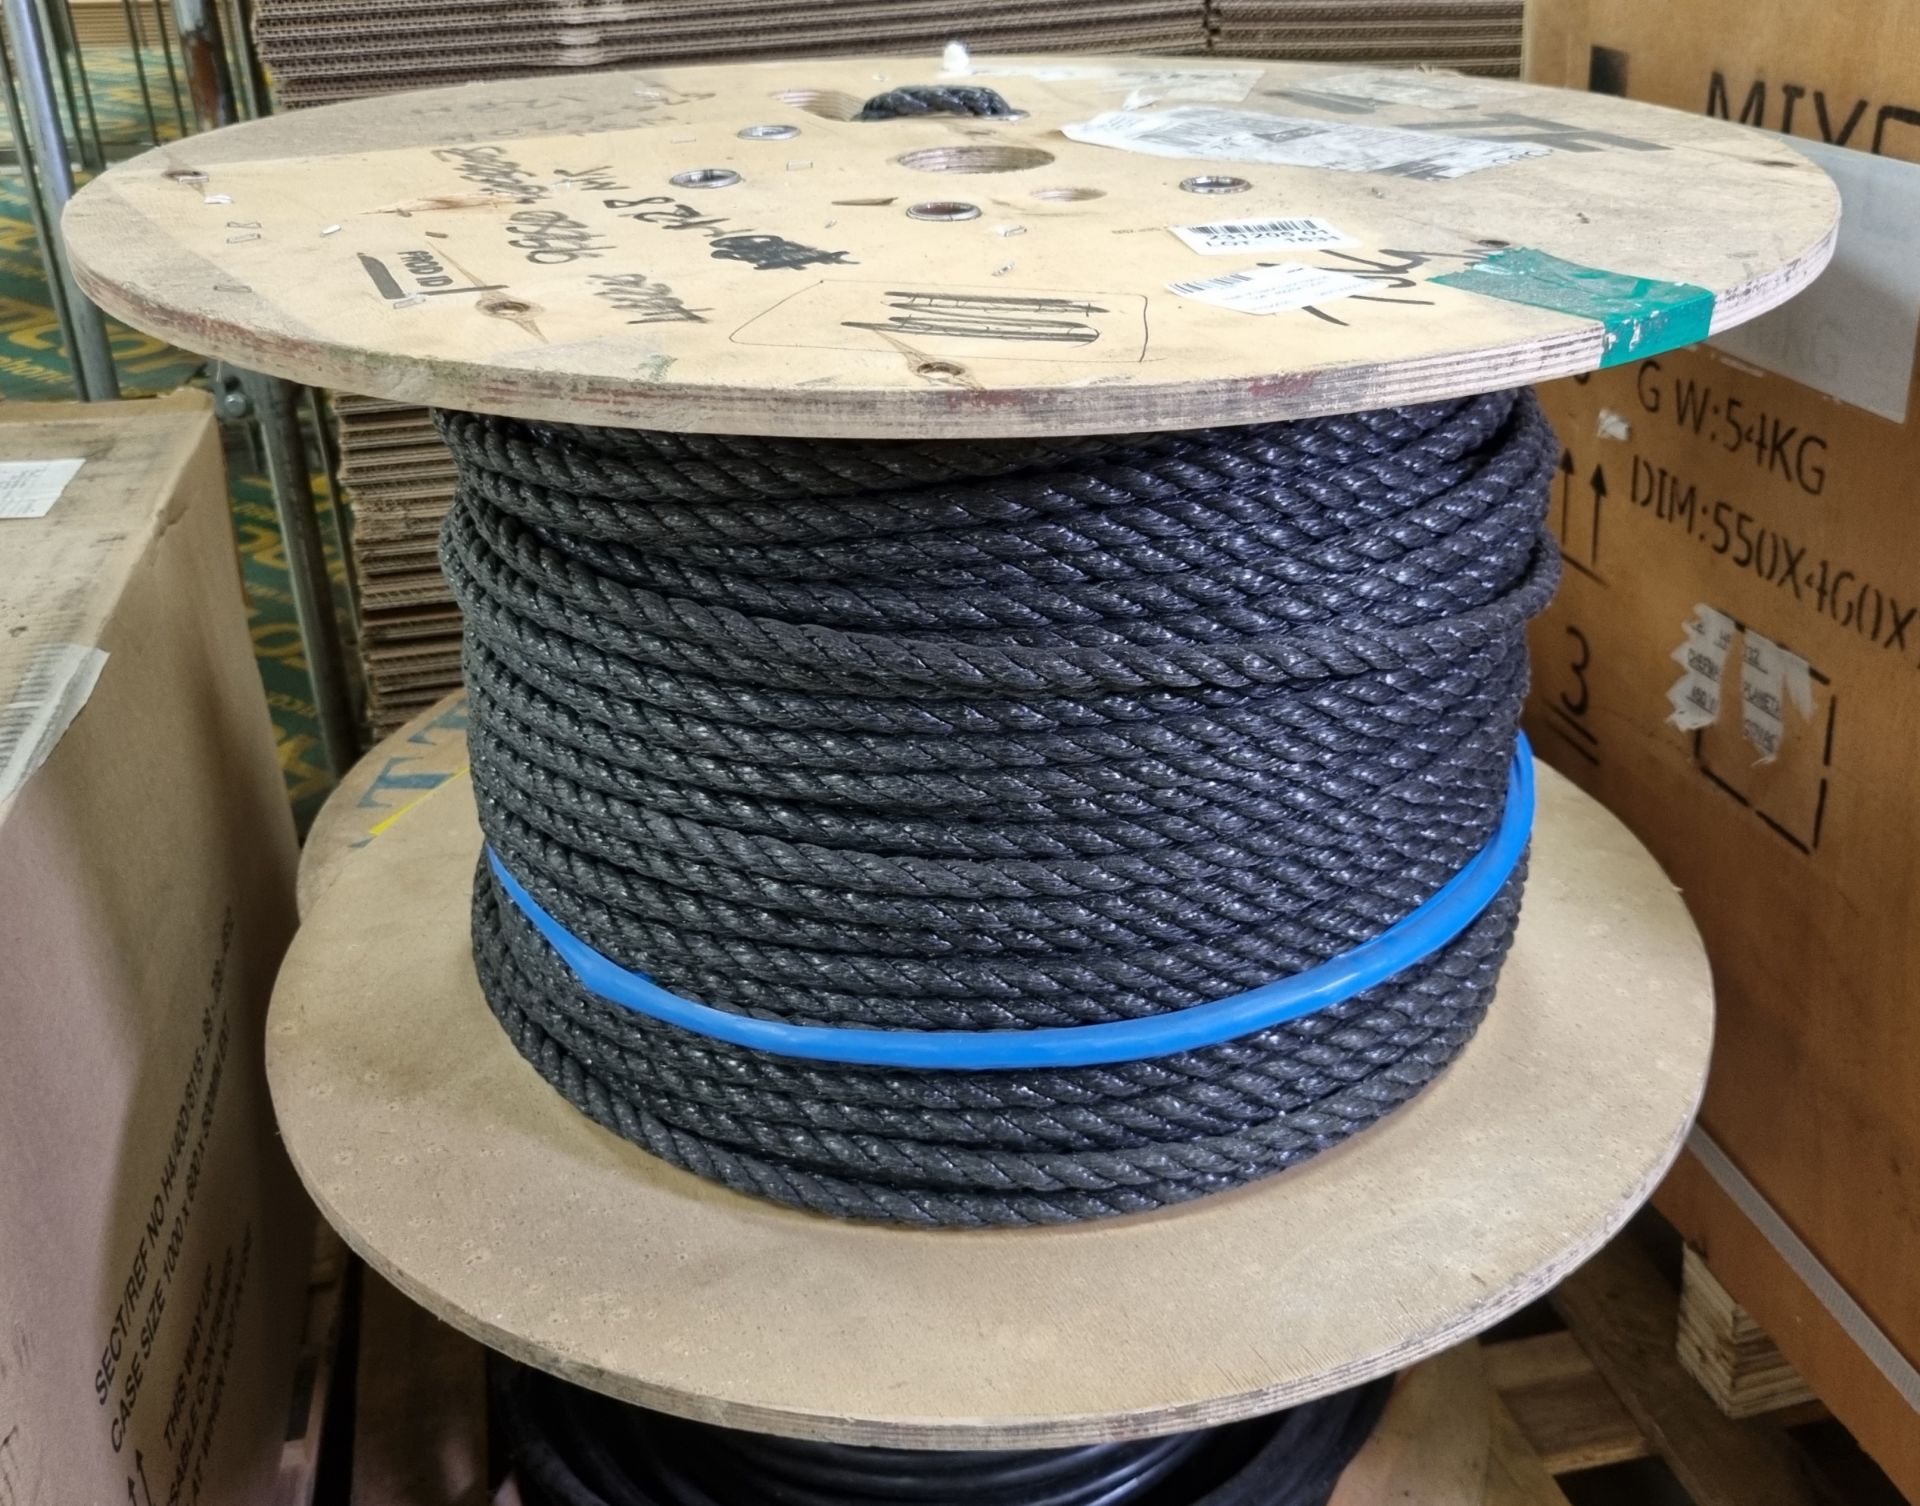 Reel of black nylon fibrous rope - approx 120m, Reel of Nexans 20 x 2 x 0.5 shielded telephone cable - Image 3 of 4